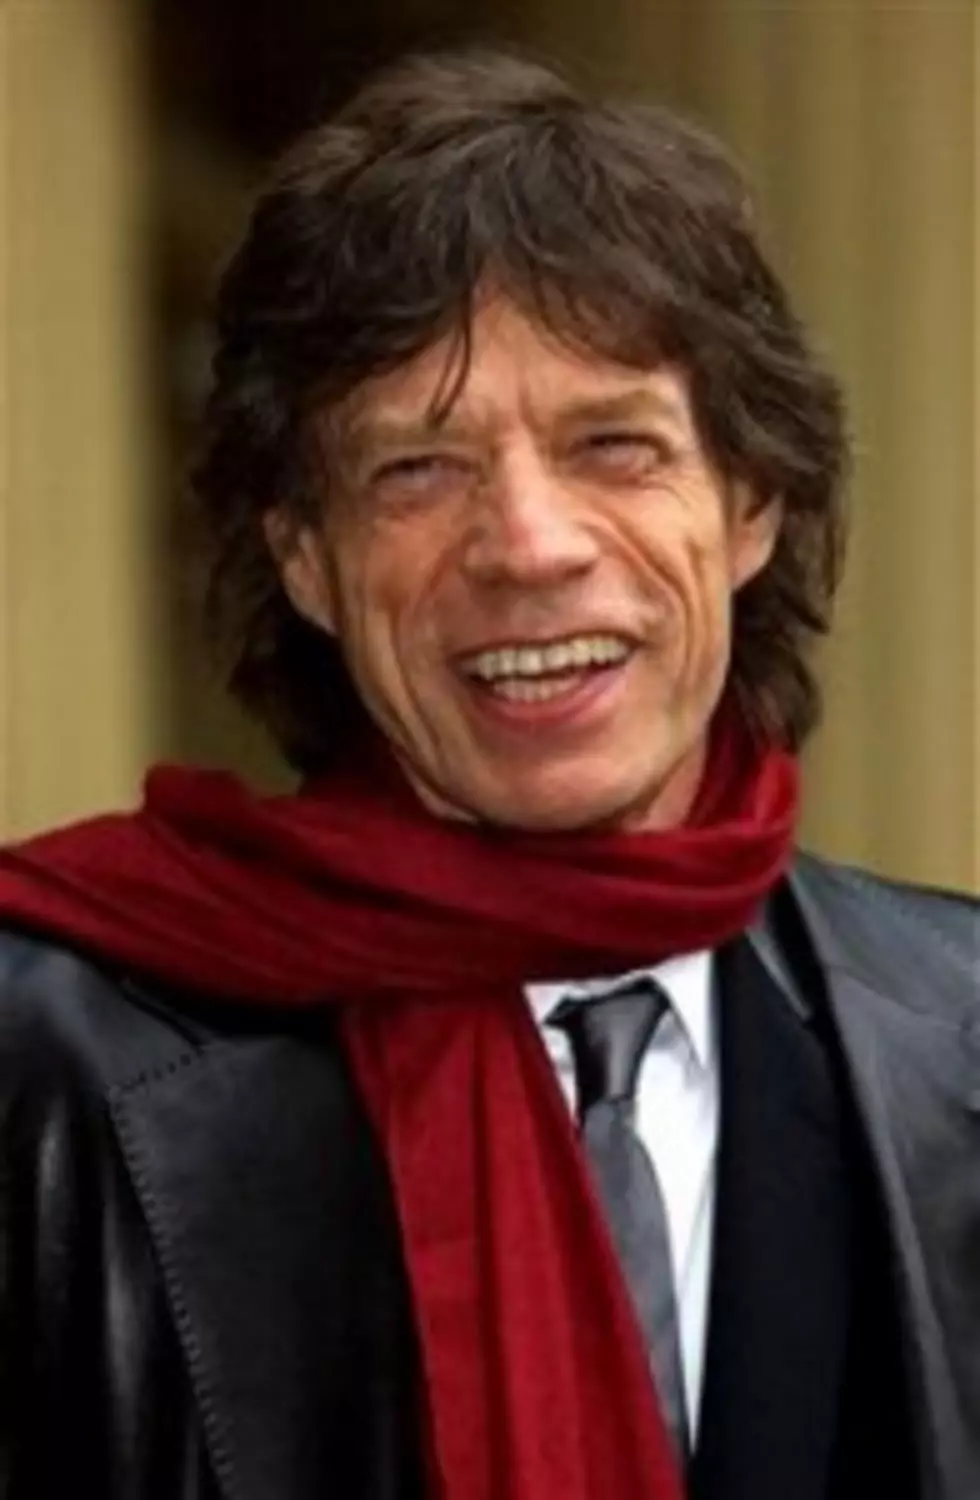 What Has Mick Jagger Never Done?